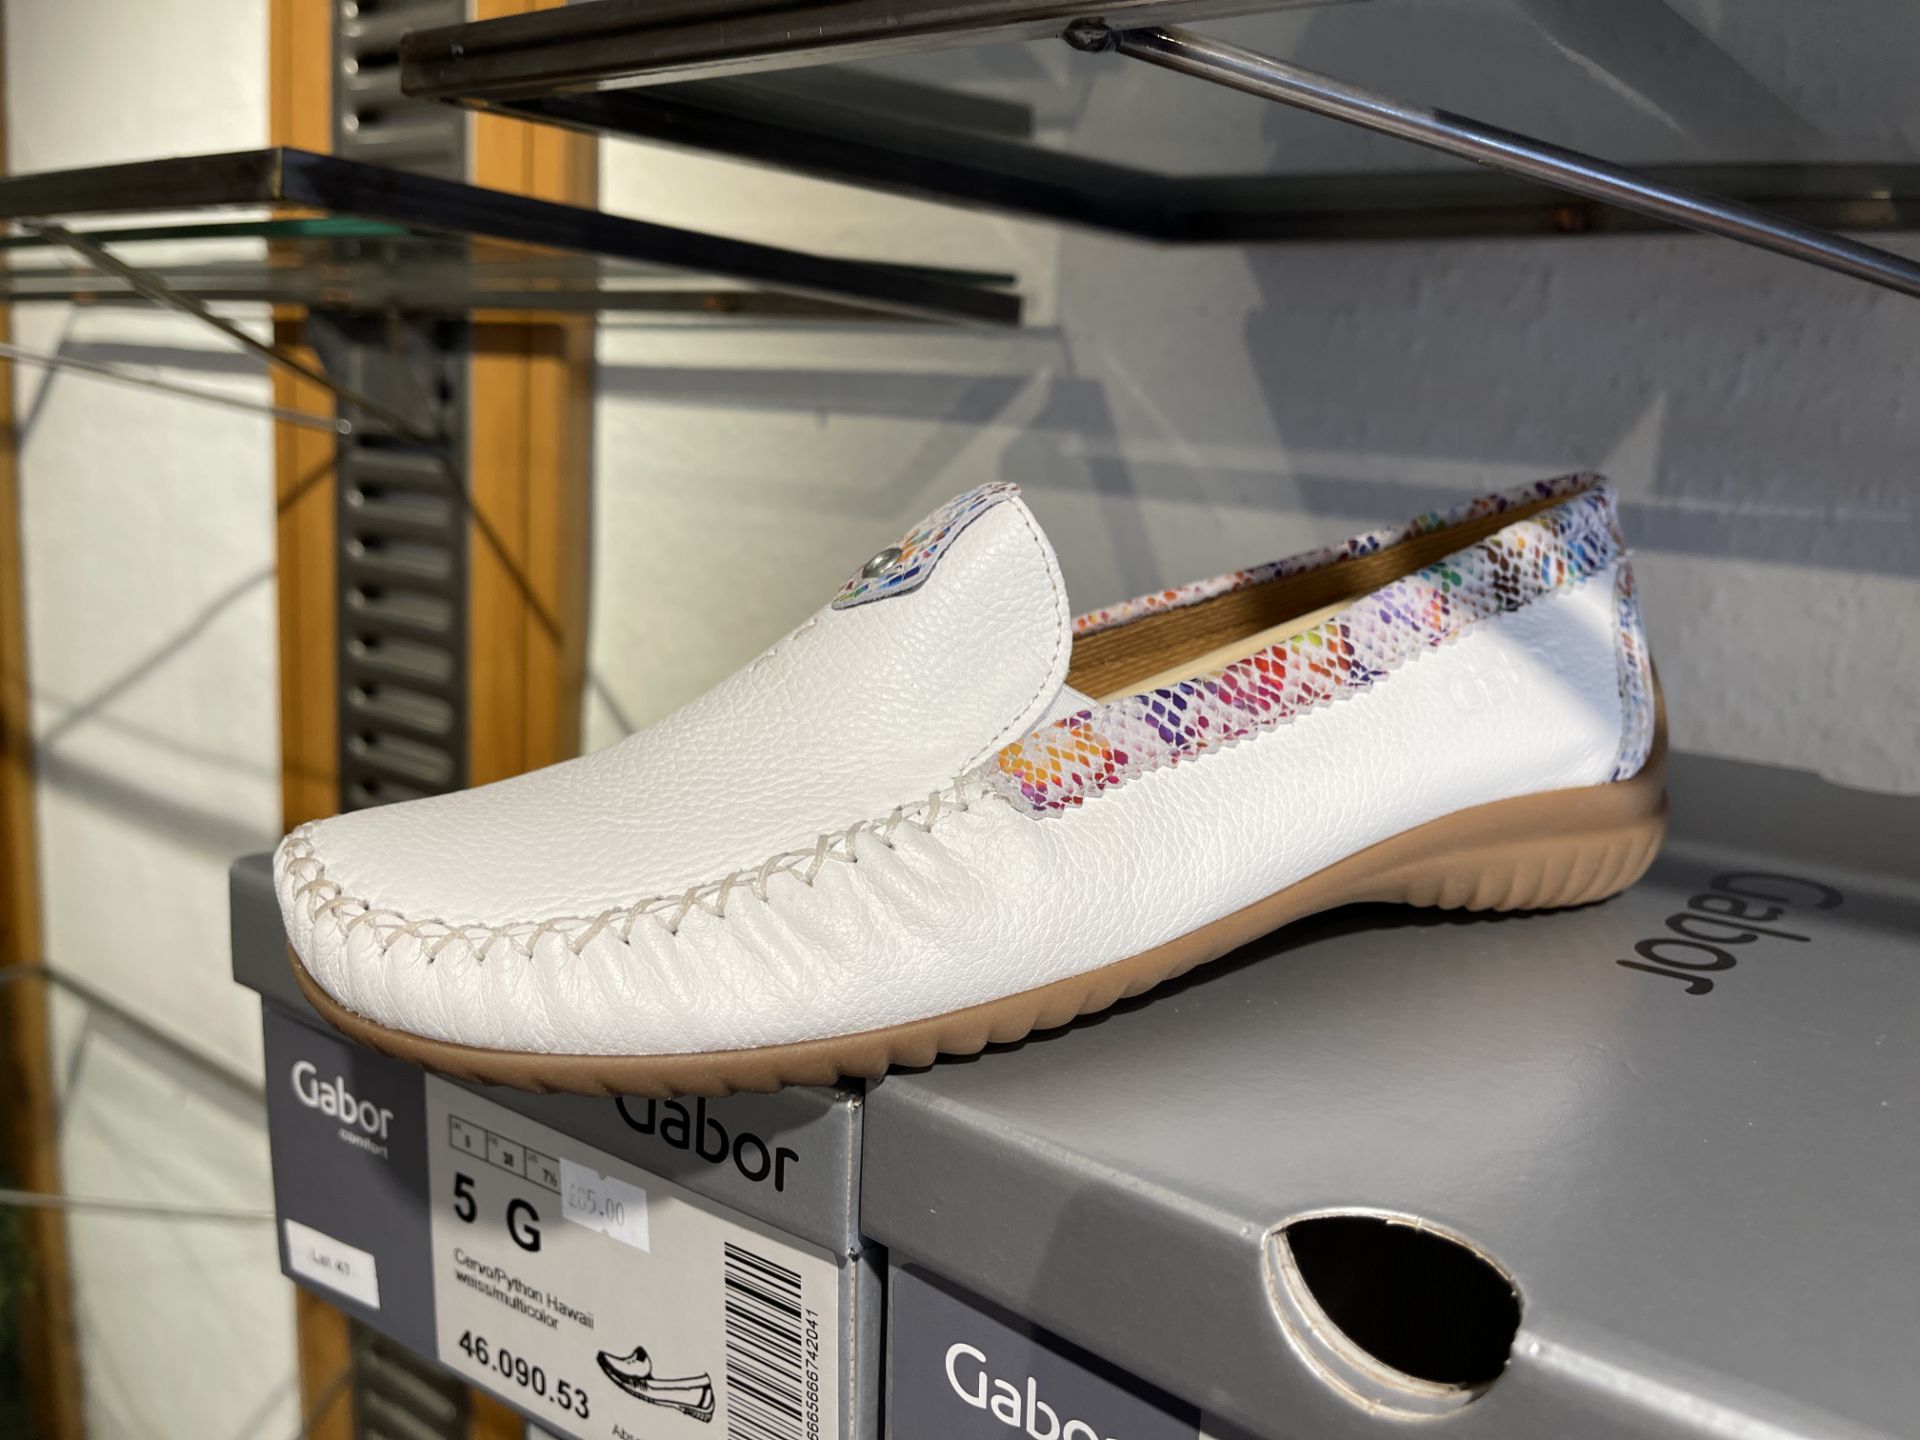 Gabor 8 Pairs: Cervo/Python Hawaii Weiss/Multicolor Shoes 46.090.53. Sizes 4 - 8 (RRP £85) Gabor 3 - Image 2 of 13